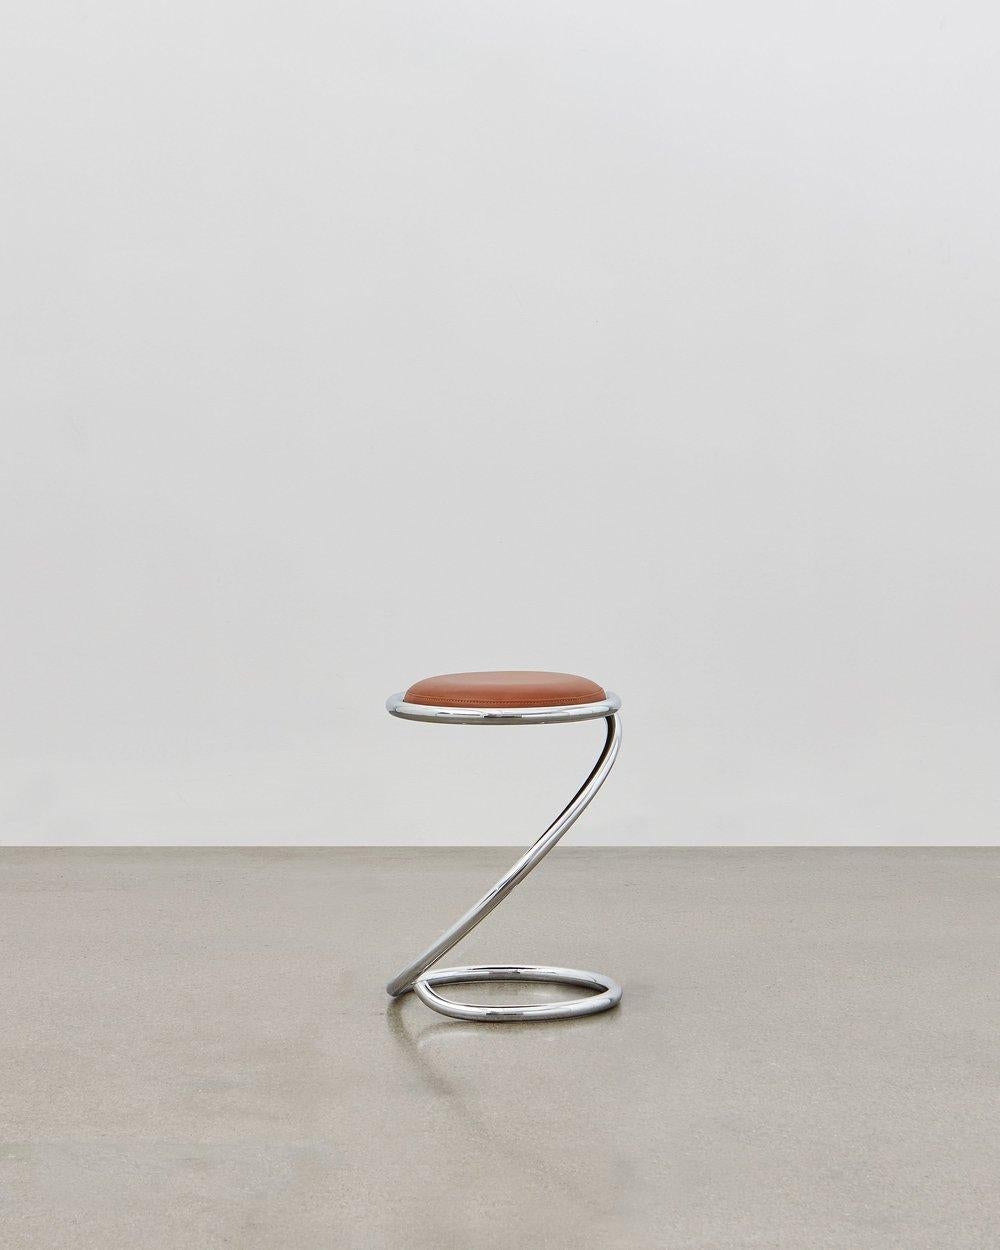 The PH Snake stool is completely true to the original design and the use of chromed steel tubes, however updated for the 21st century to be available with wood seating in five colorways to coordinate with the ever-popular Poul Henningsen lighting